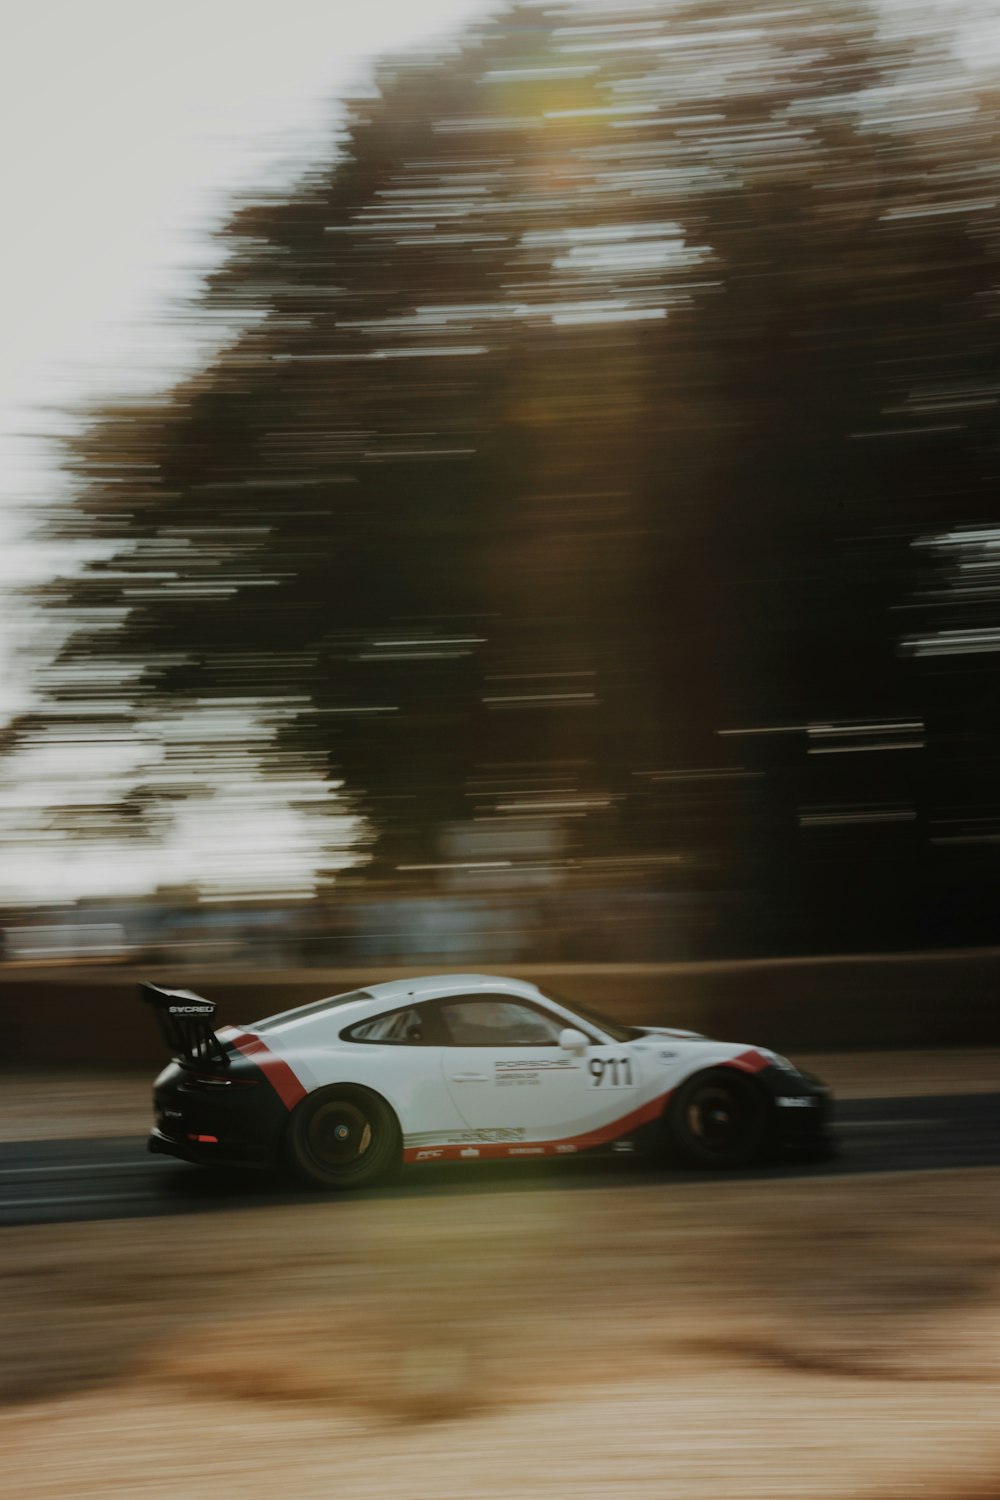 350+ Race Car Pictures | Download Free Images on Unsplash